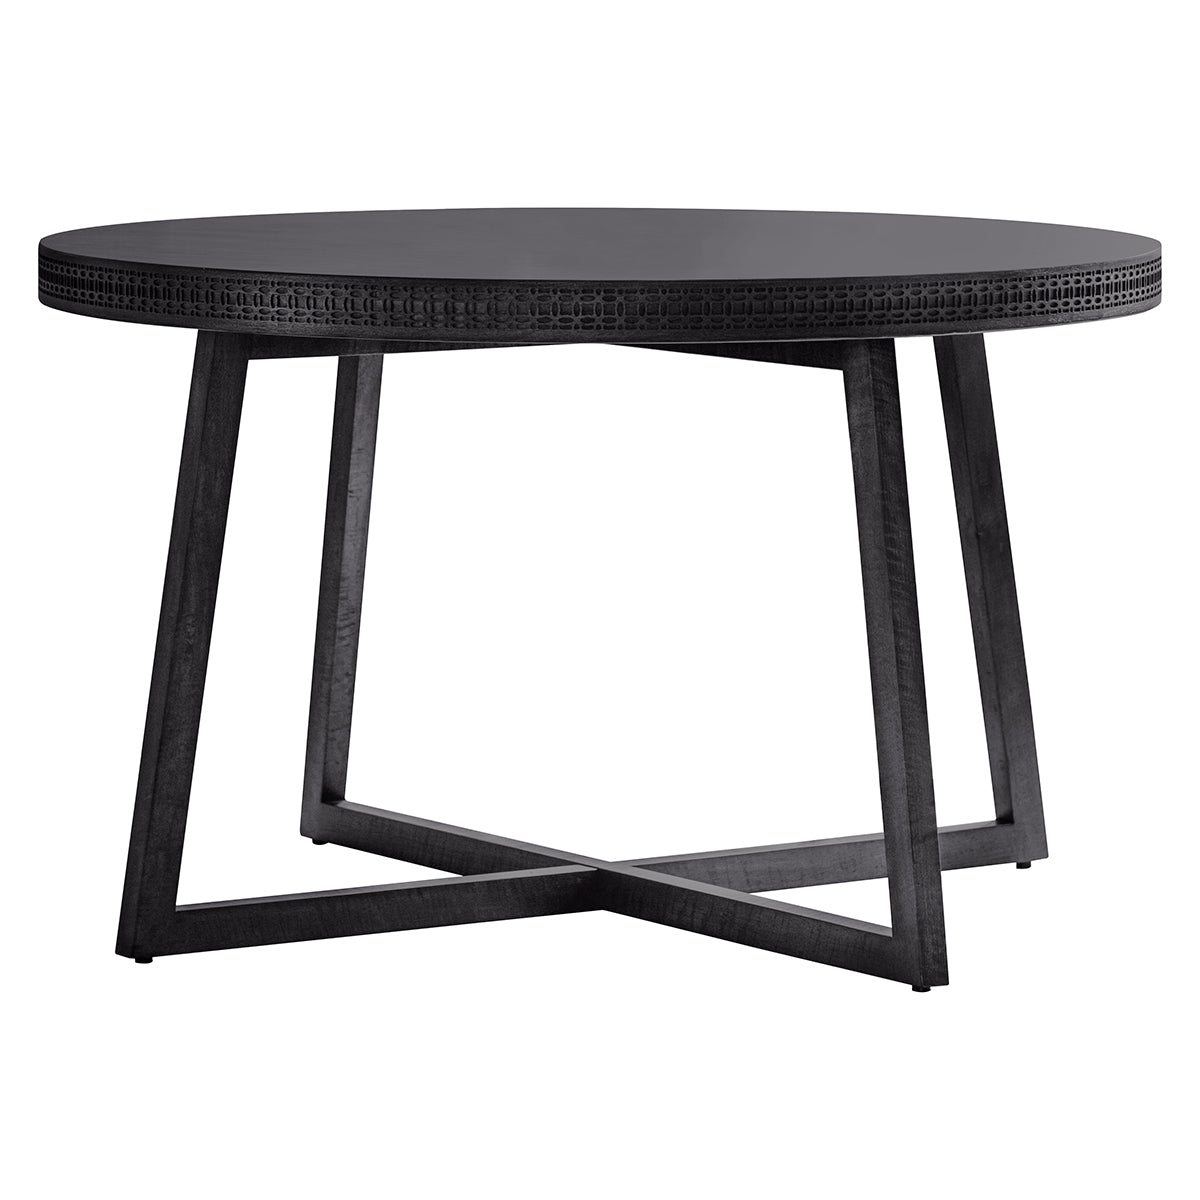 Soho Boutique Round Dining Table